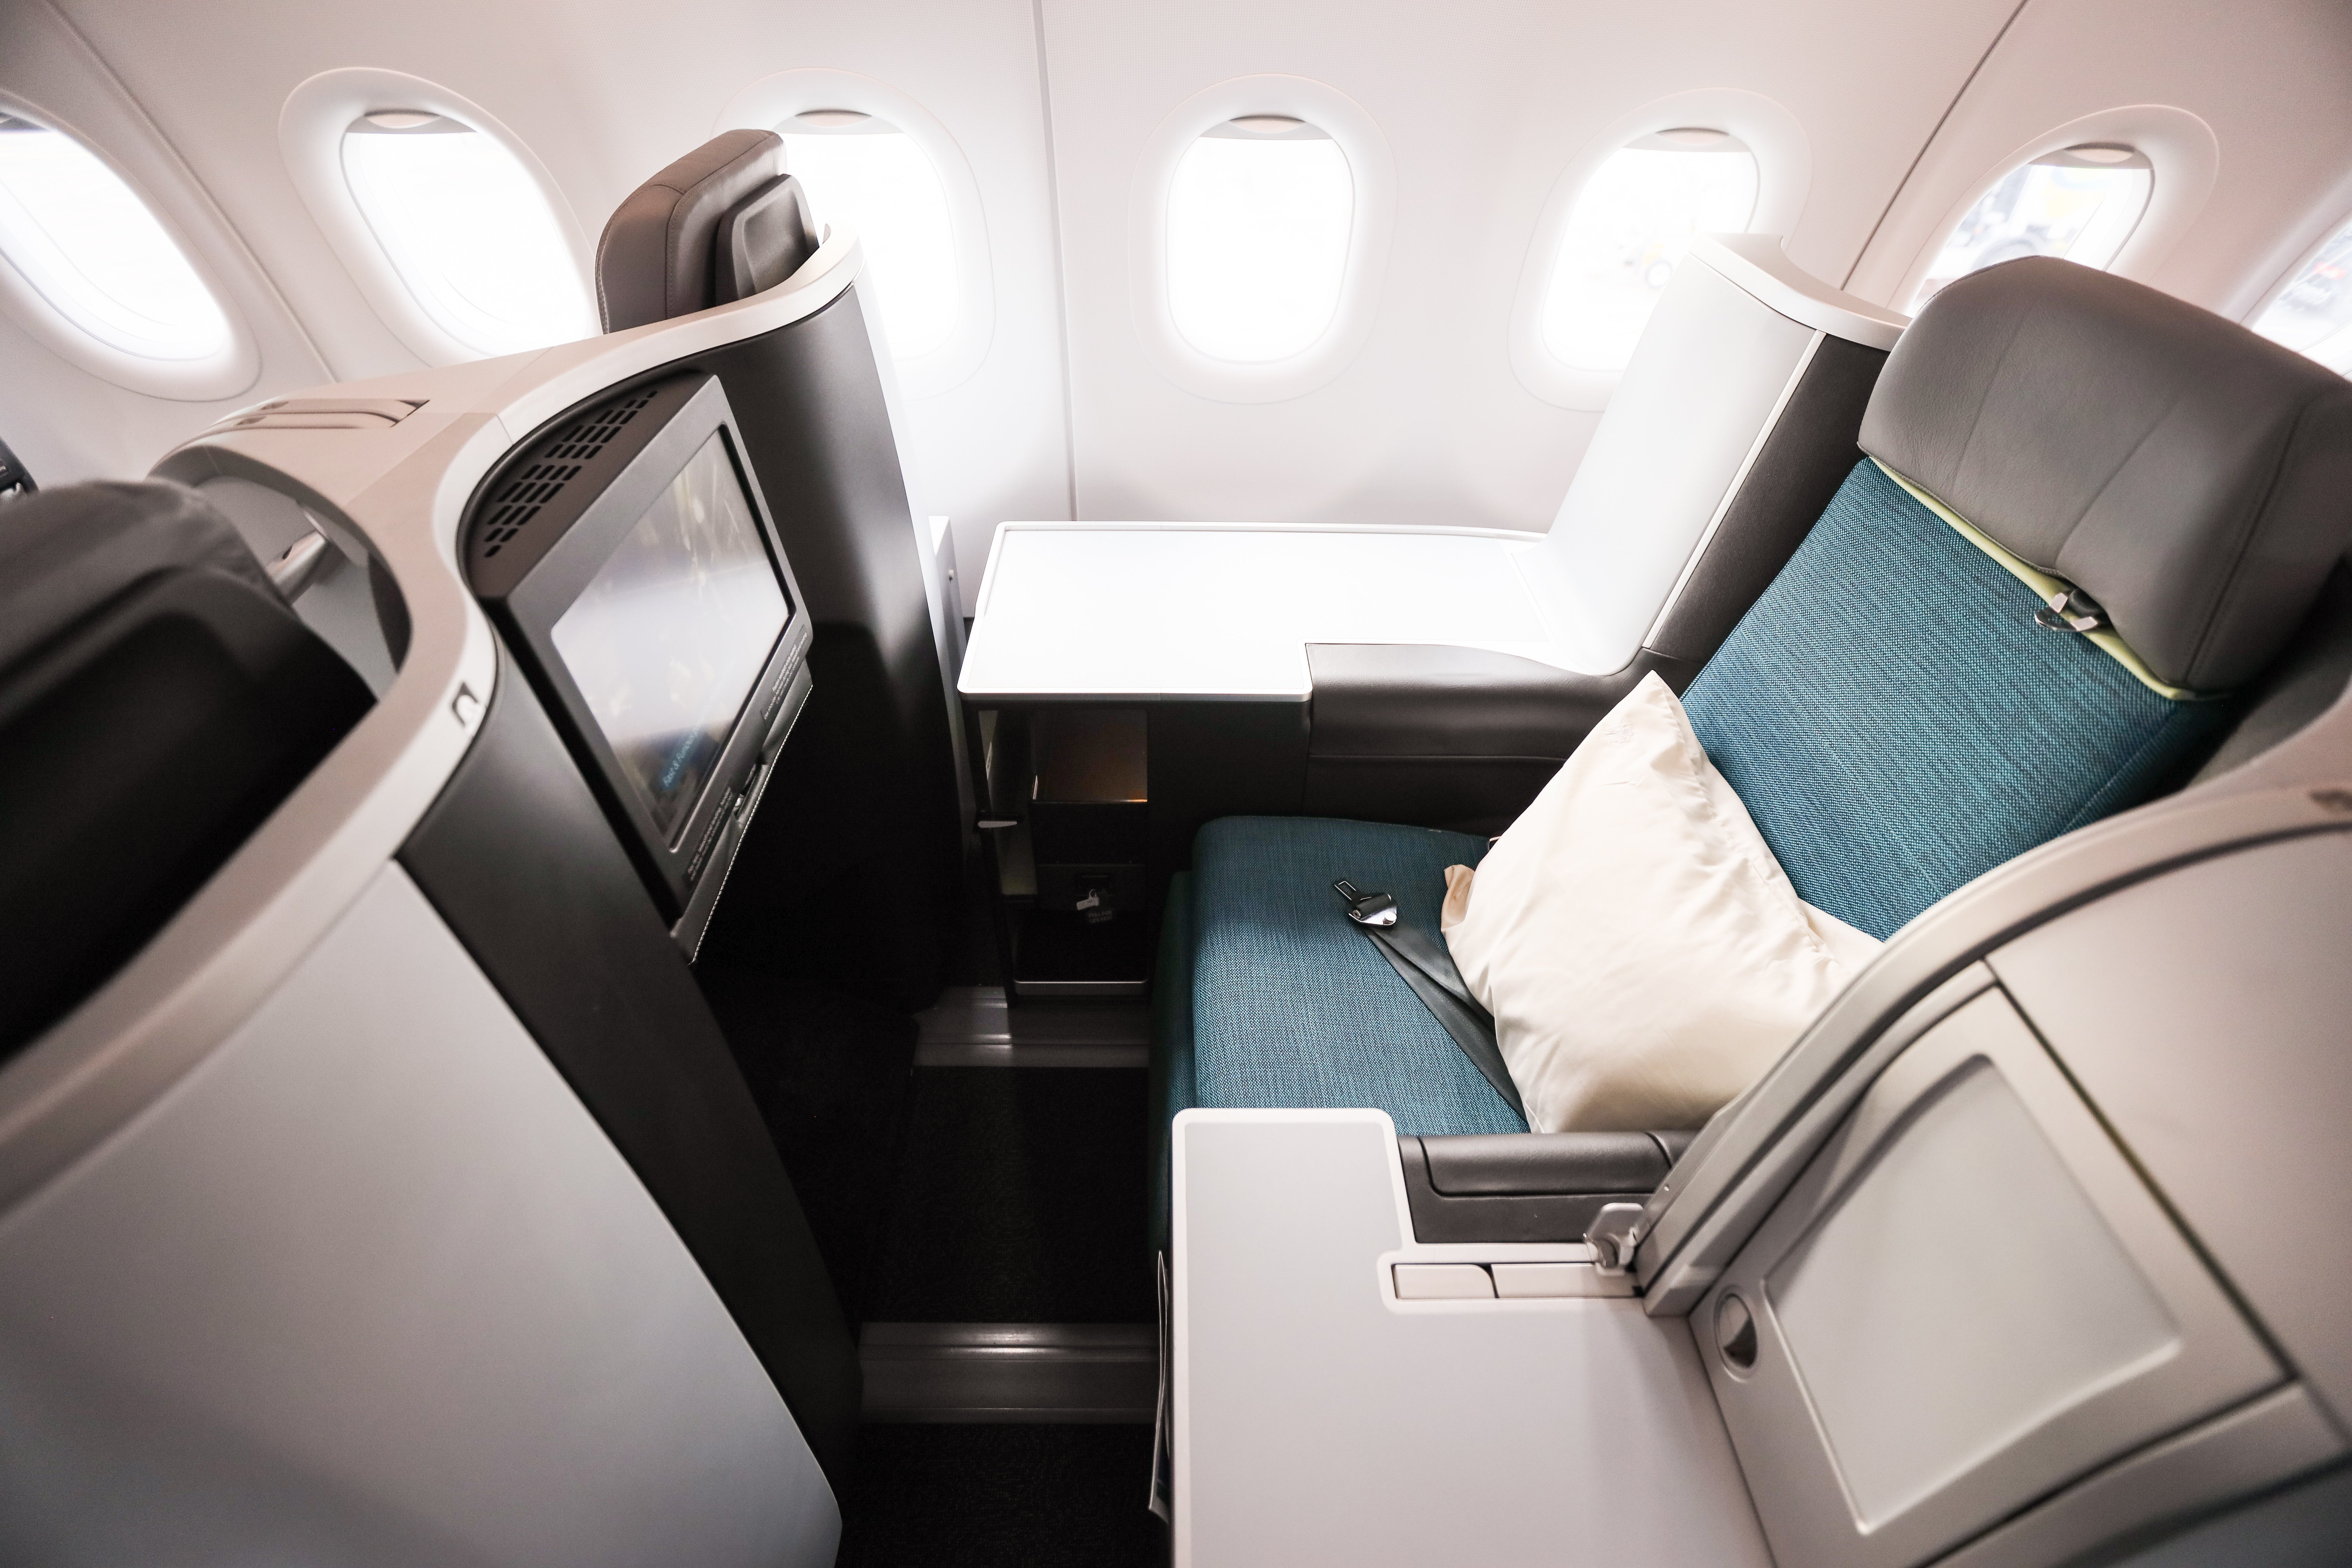 aer lingus business class review 2022